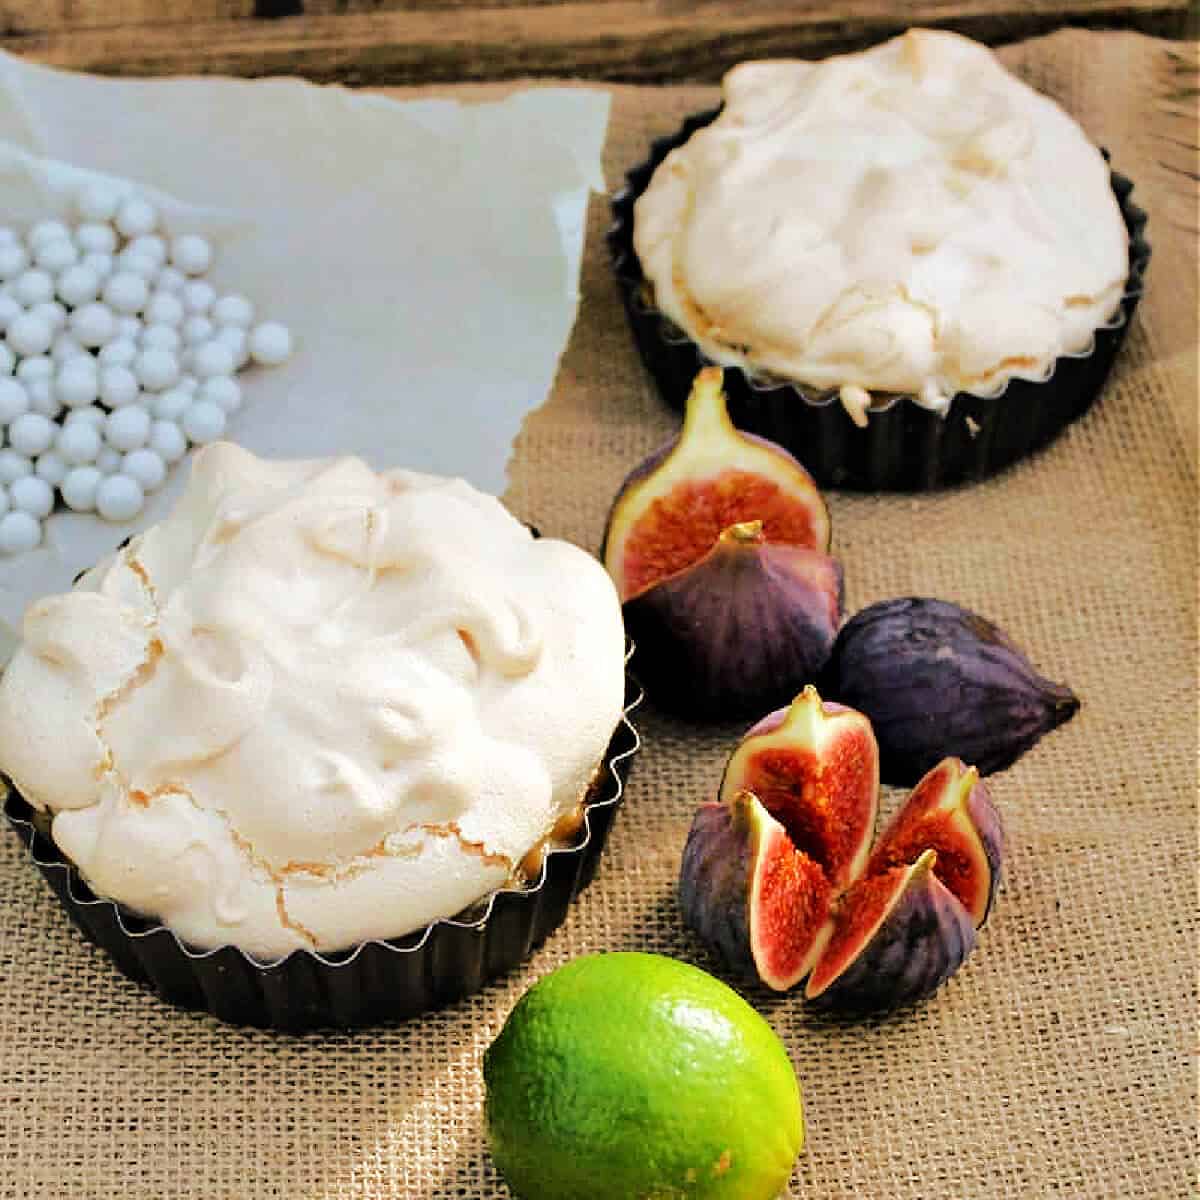 Meringue pies on a hessian cloth, lime and figs to the side.